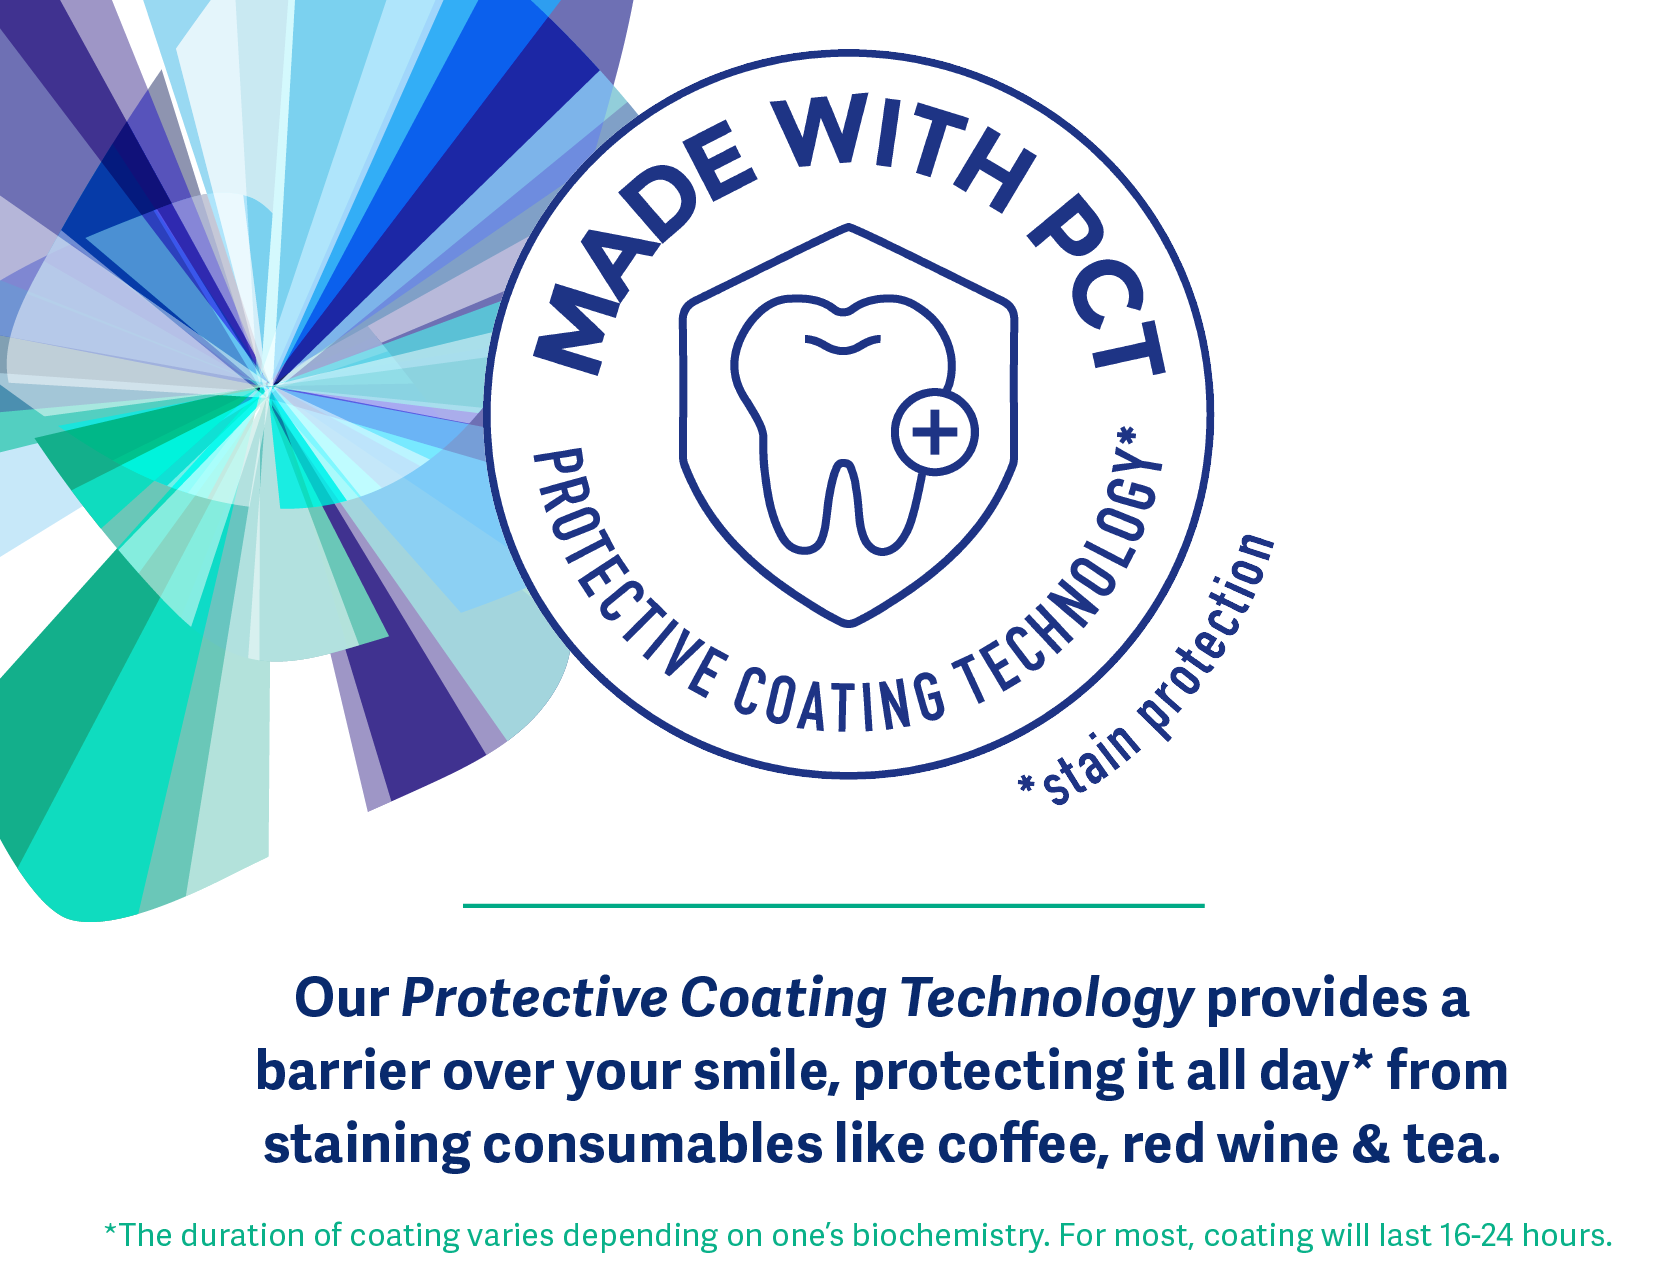 Paint on teeth whitening wiht protective coat technology. Stain protection from coffee, red wine, and tea.